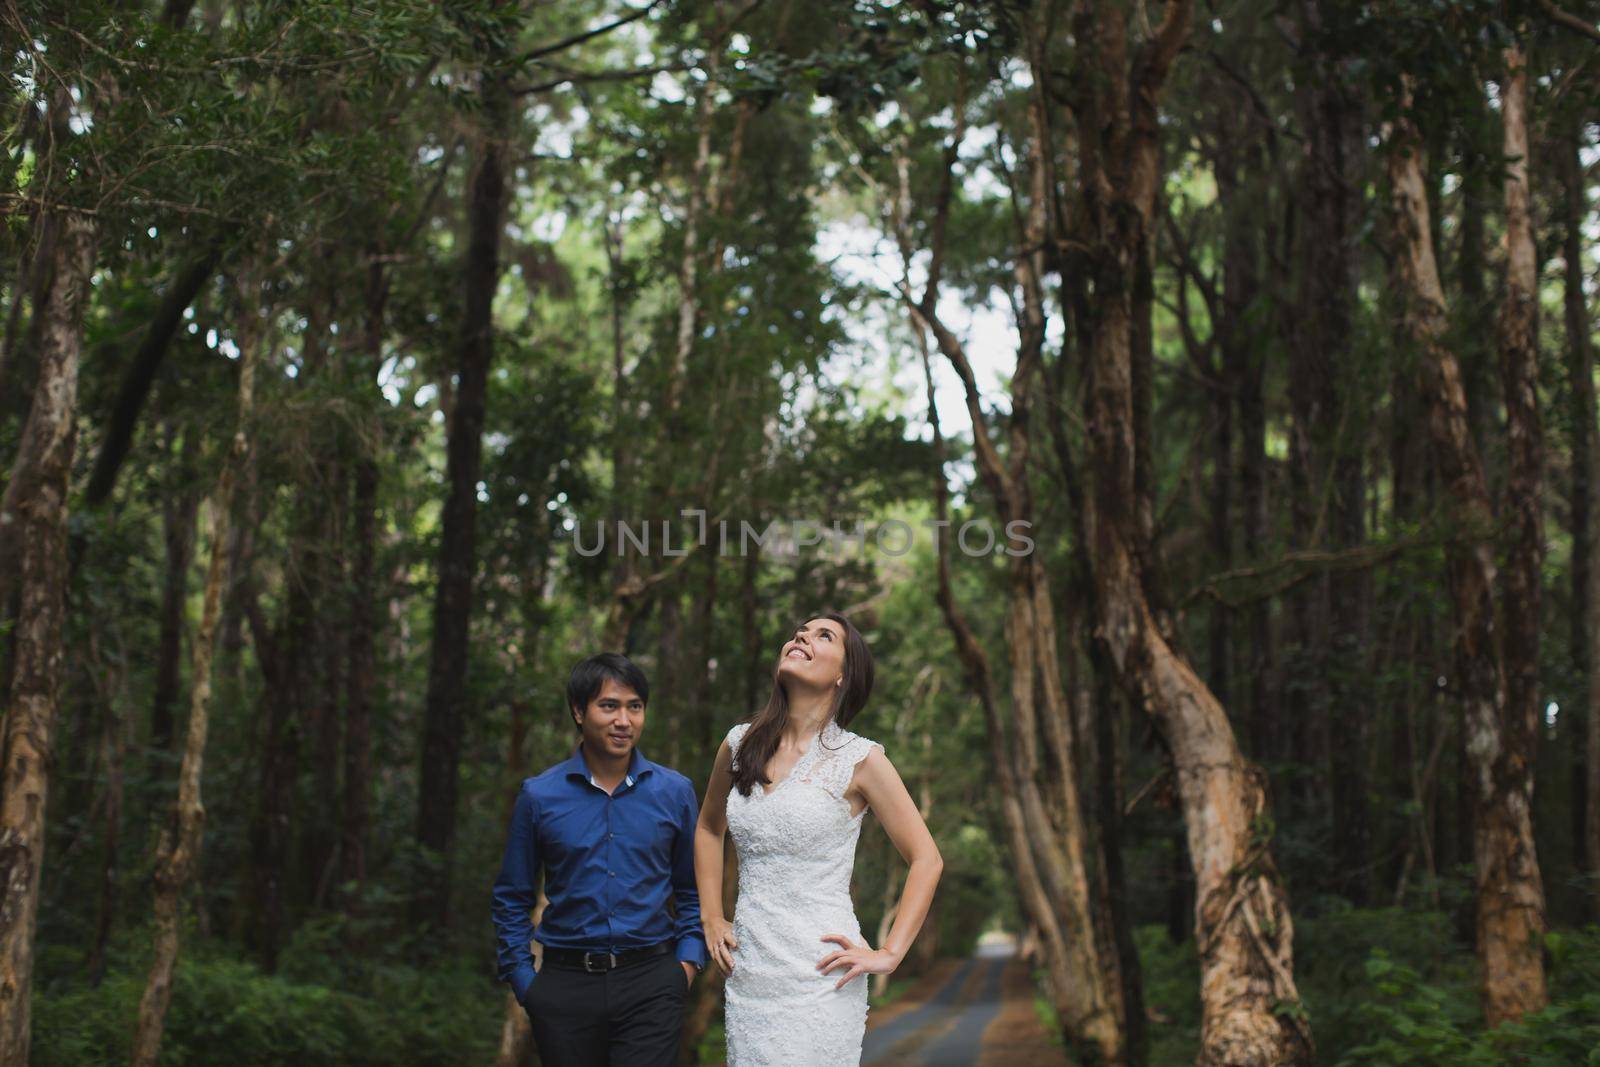 Walking the young bride and groom in the woods. by StudioPeace